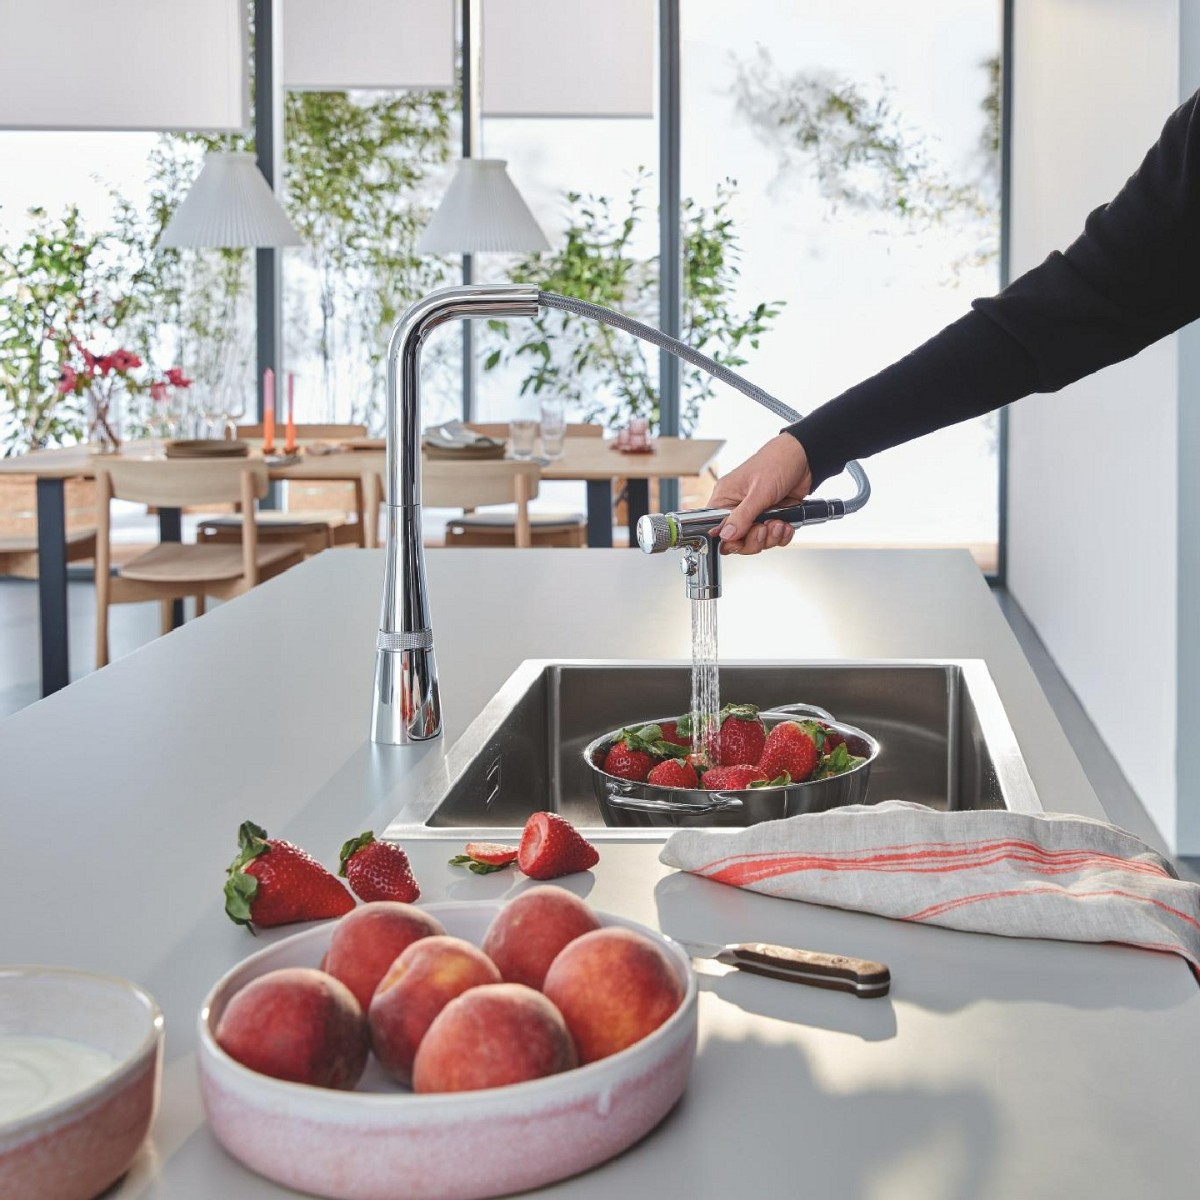 The new #GROHE SmartControl Dual Spray kitchen #faucets - now with dual spray! The hygienic start/stop works with a touch of the hand – or elbow if your hands are messy – while Dual Spray offers a jet for volume or a shower for rinsing. Discover more: fal.cn/3Aejf